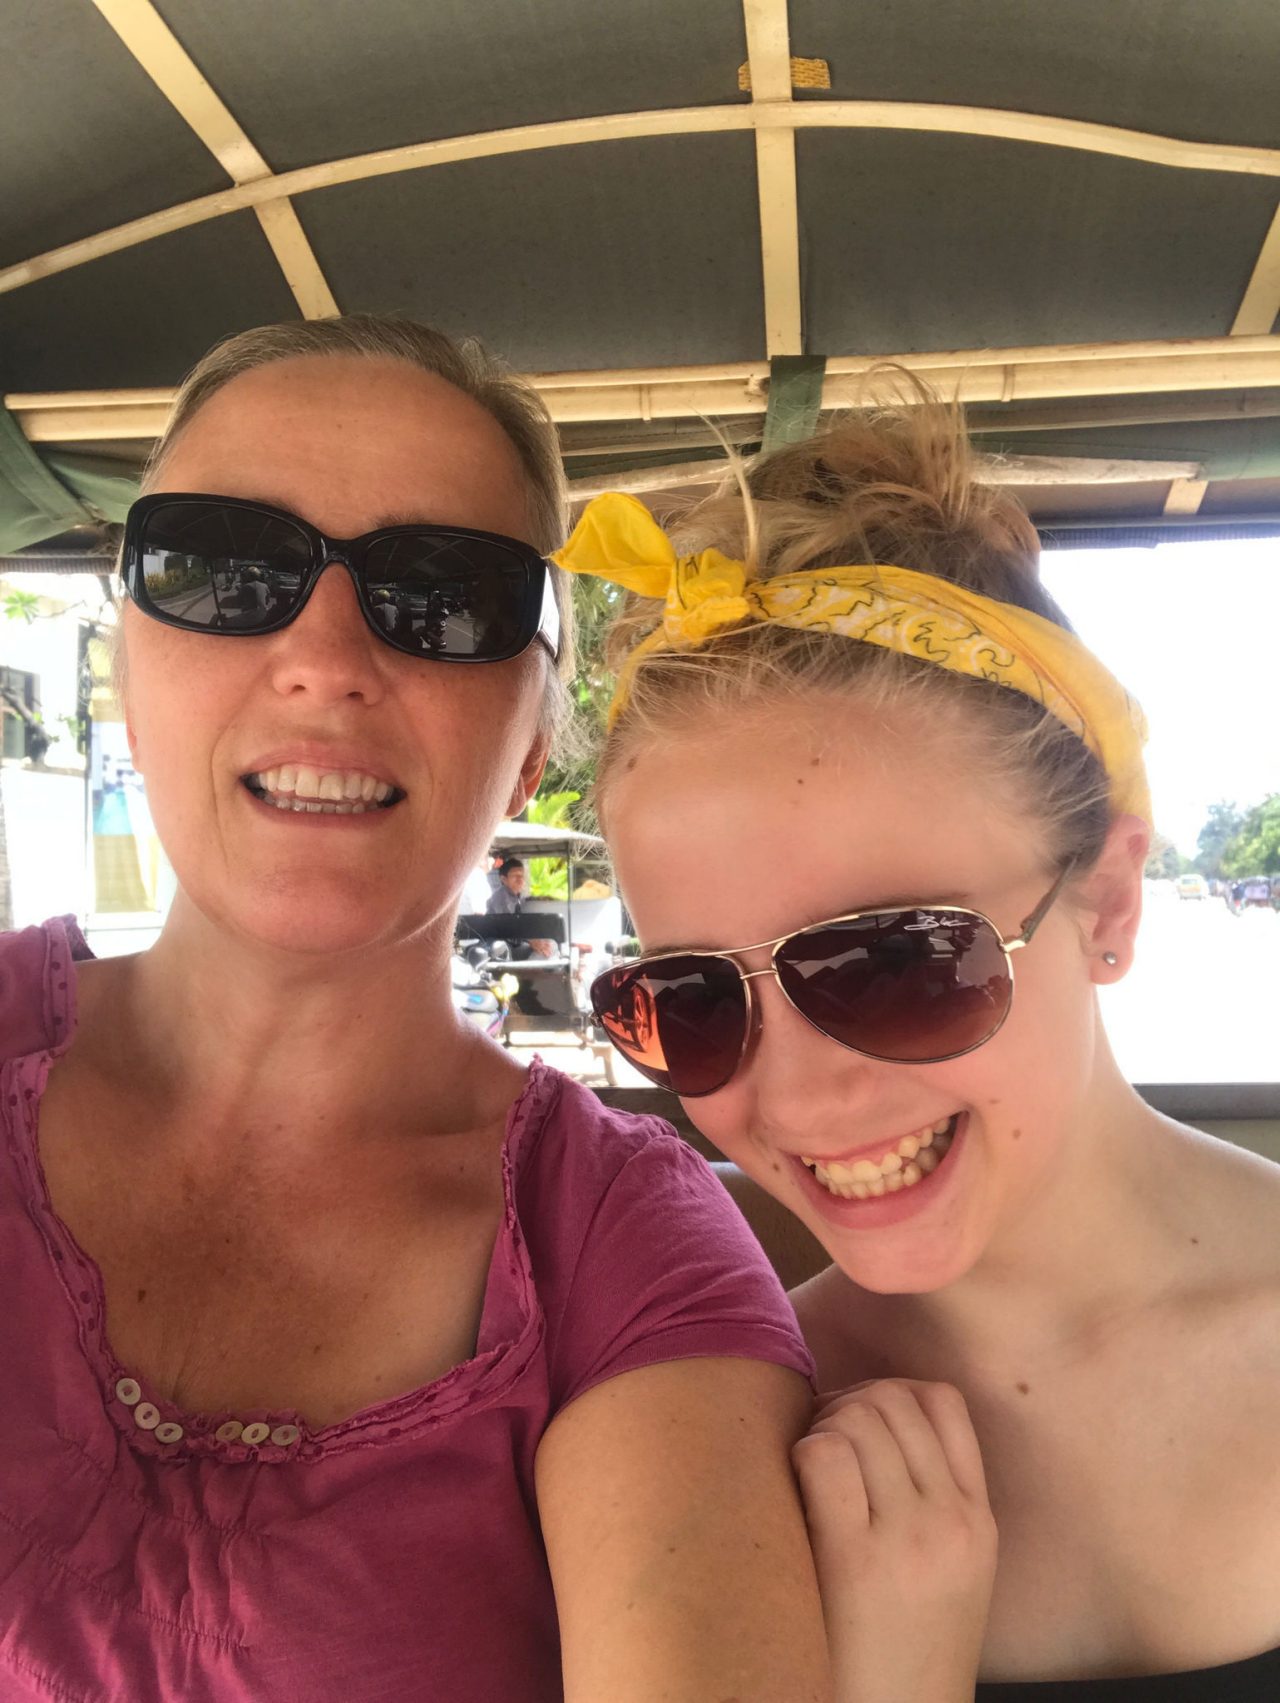 Mother and daughter taking a selfie smiling and wearing sunglasses